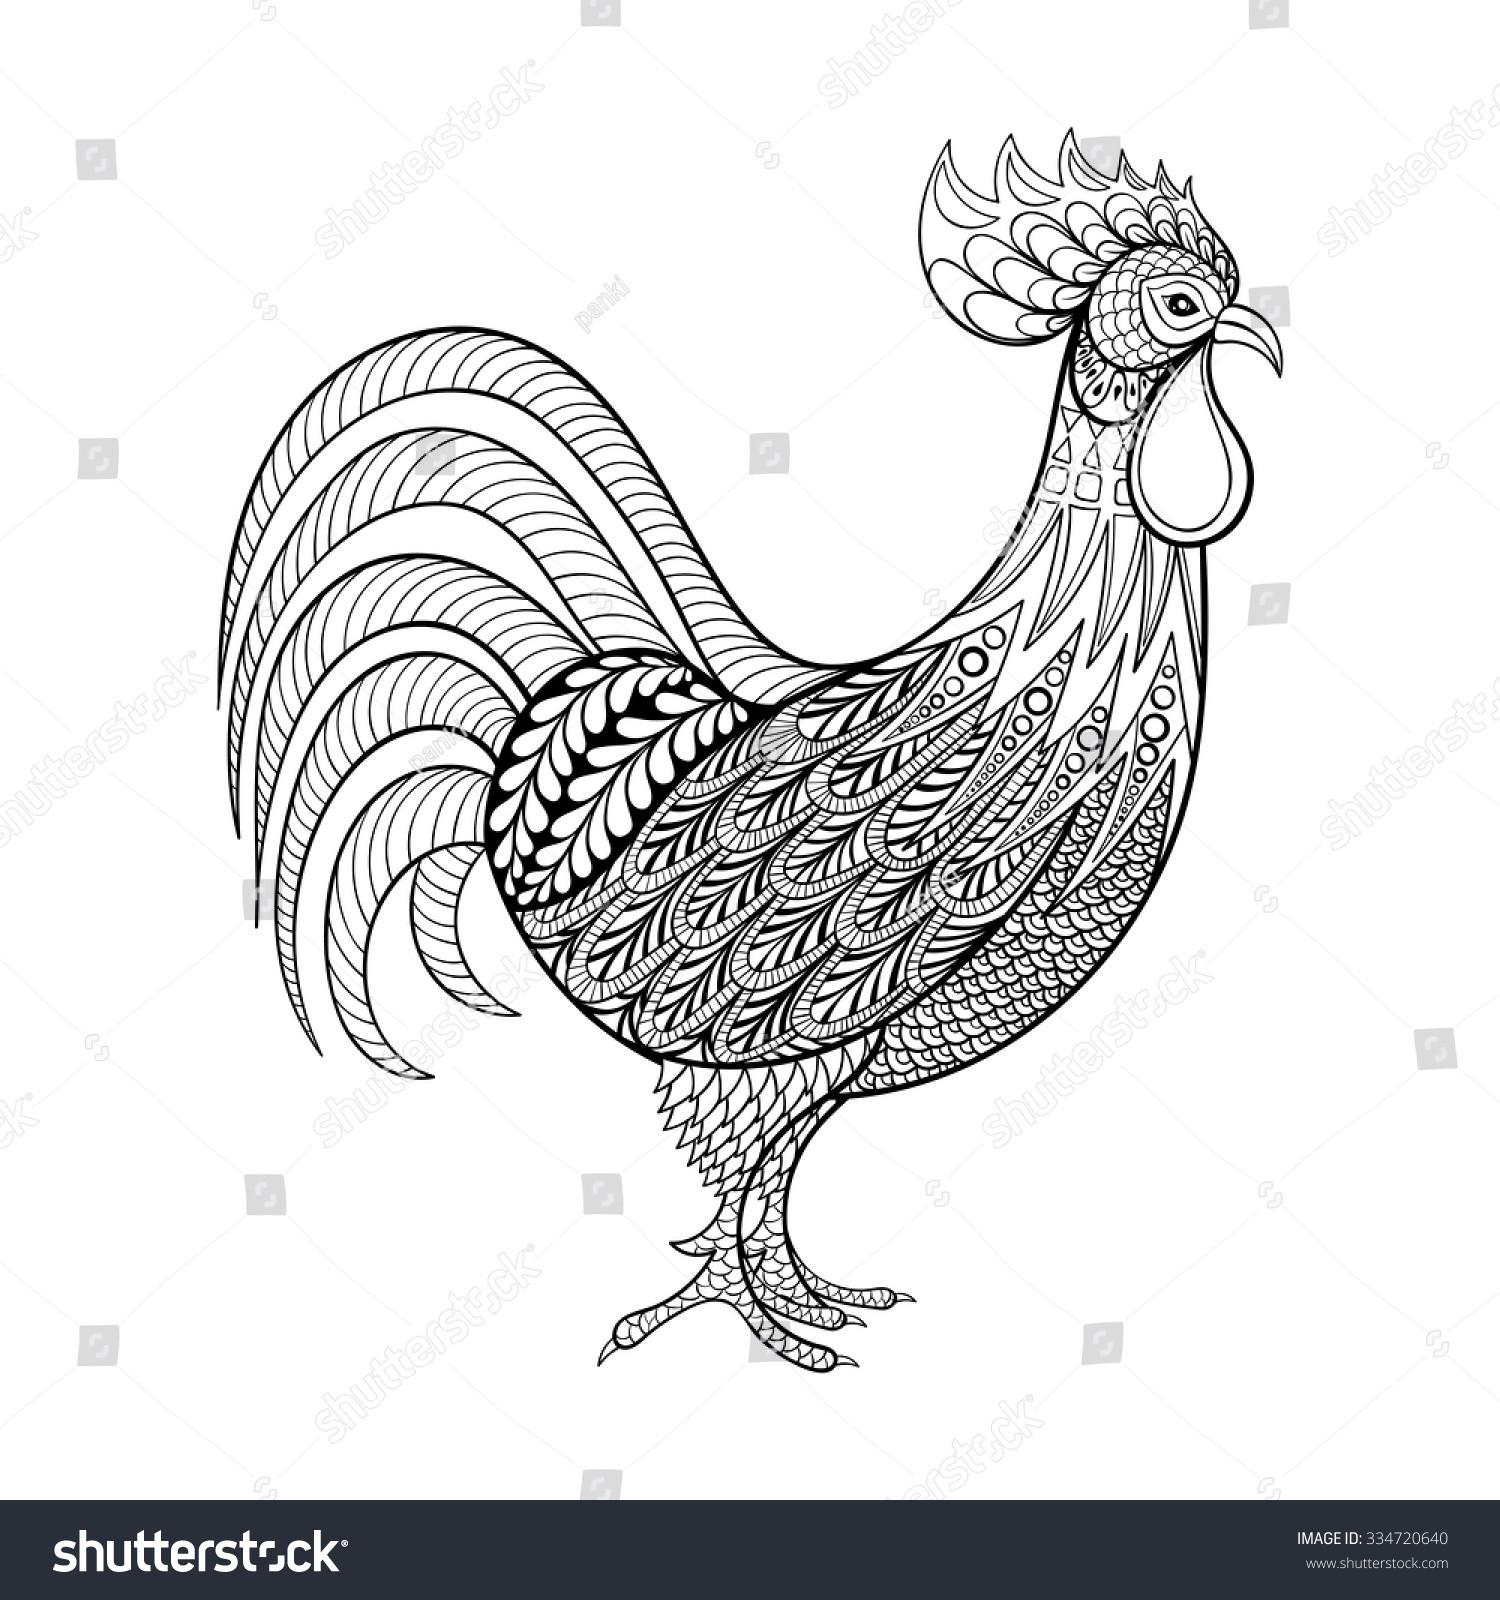 Chicken Coloring Pages For Adults
 Rooster Chicken Domestic Farmer Bird Coloring Stock Vector